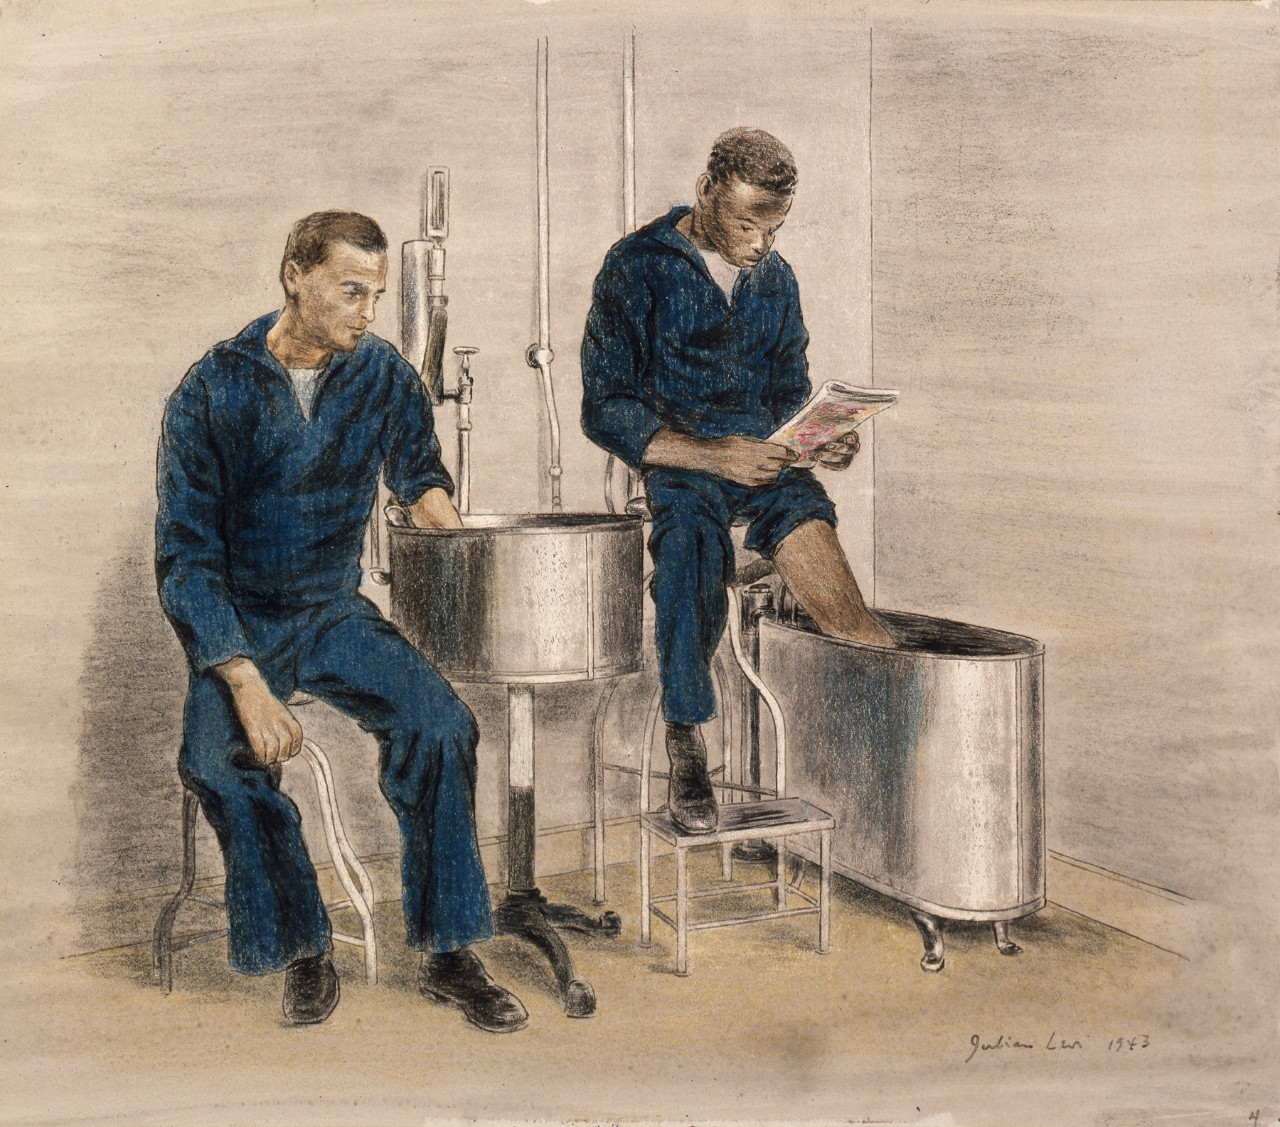 Two sailors undergo water therapy